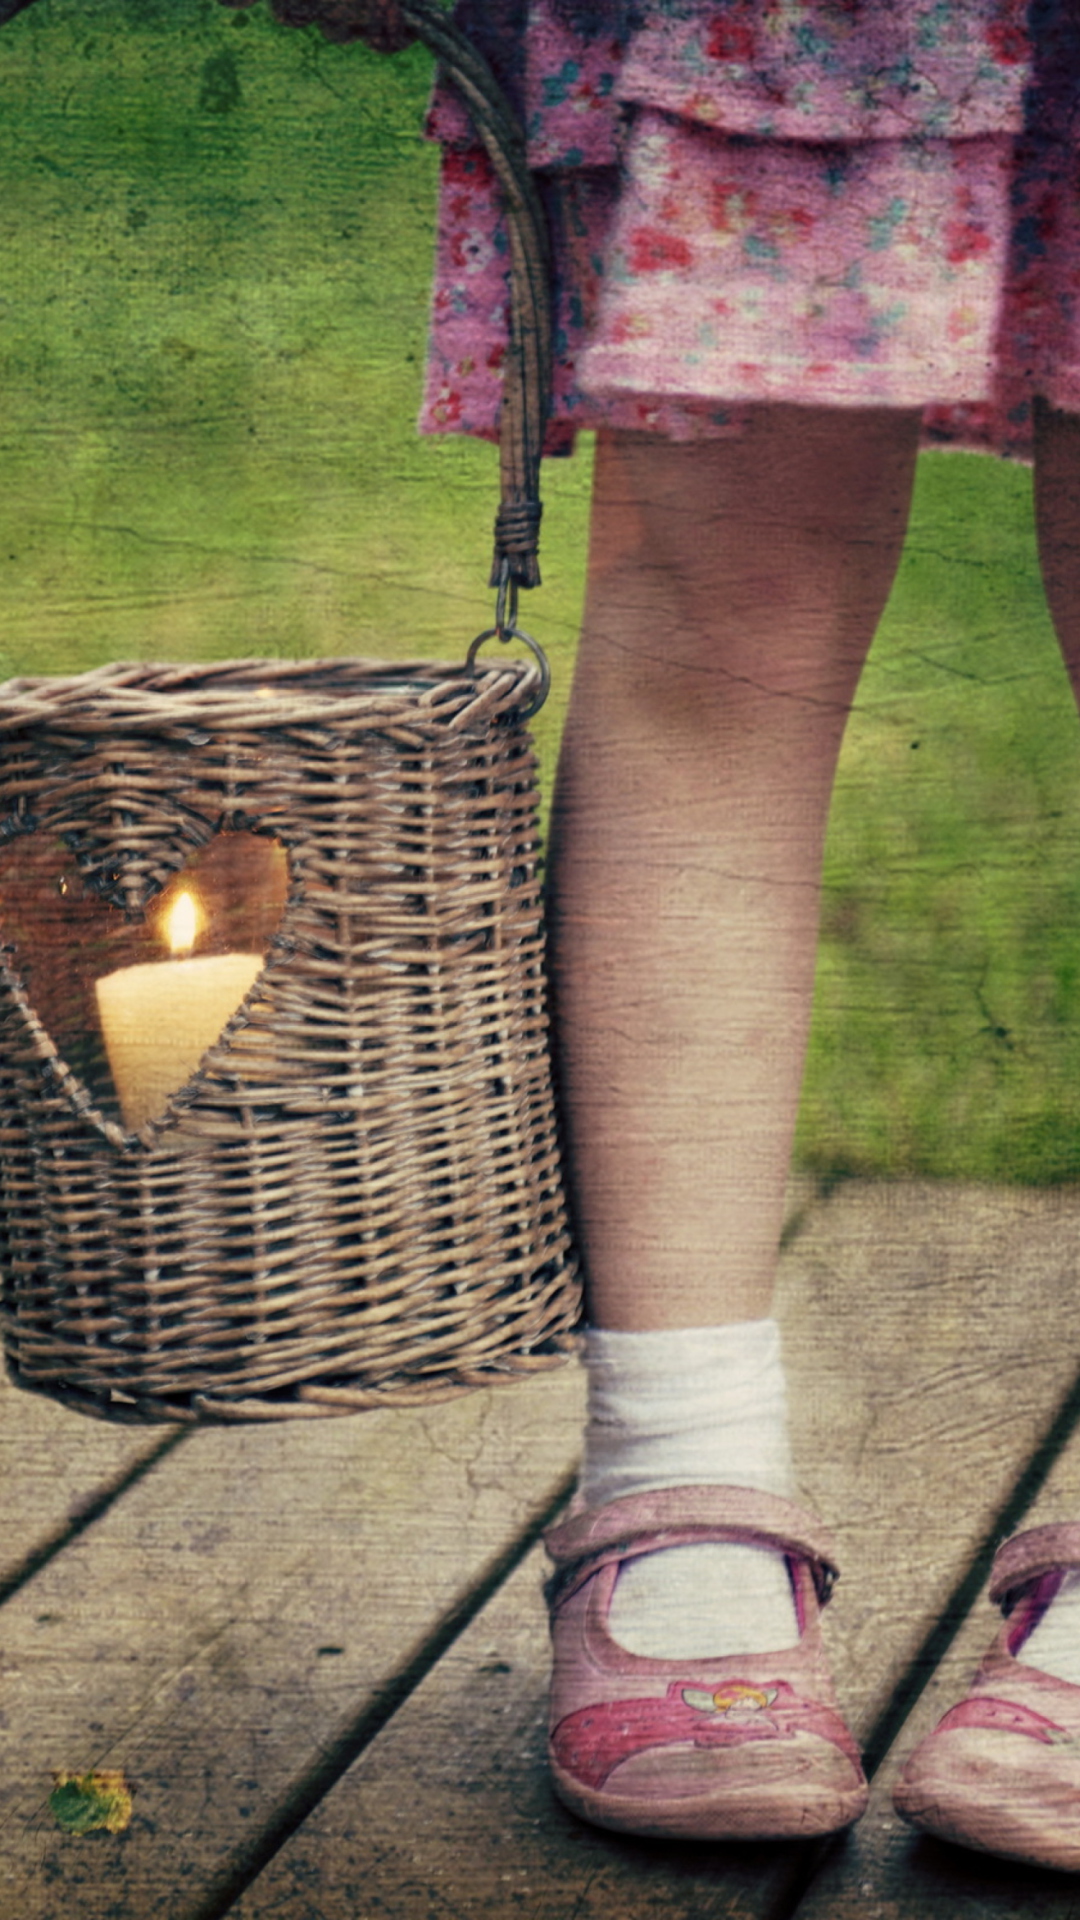 Das Child With Basket And Candle Wallpaper 1080x1920